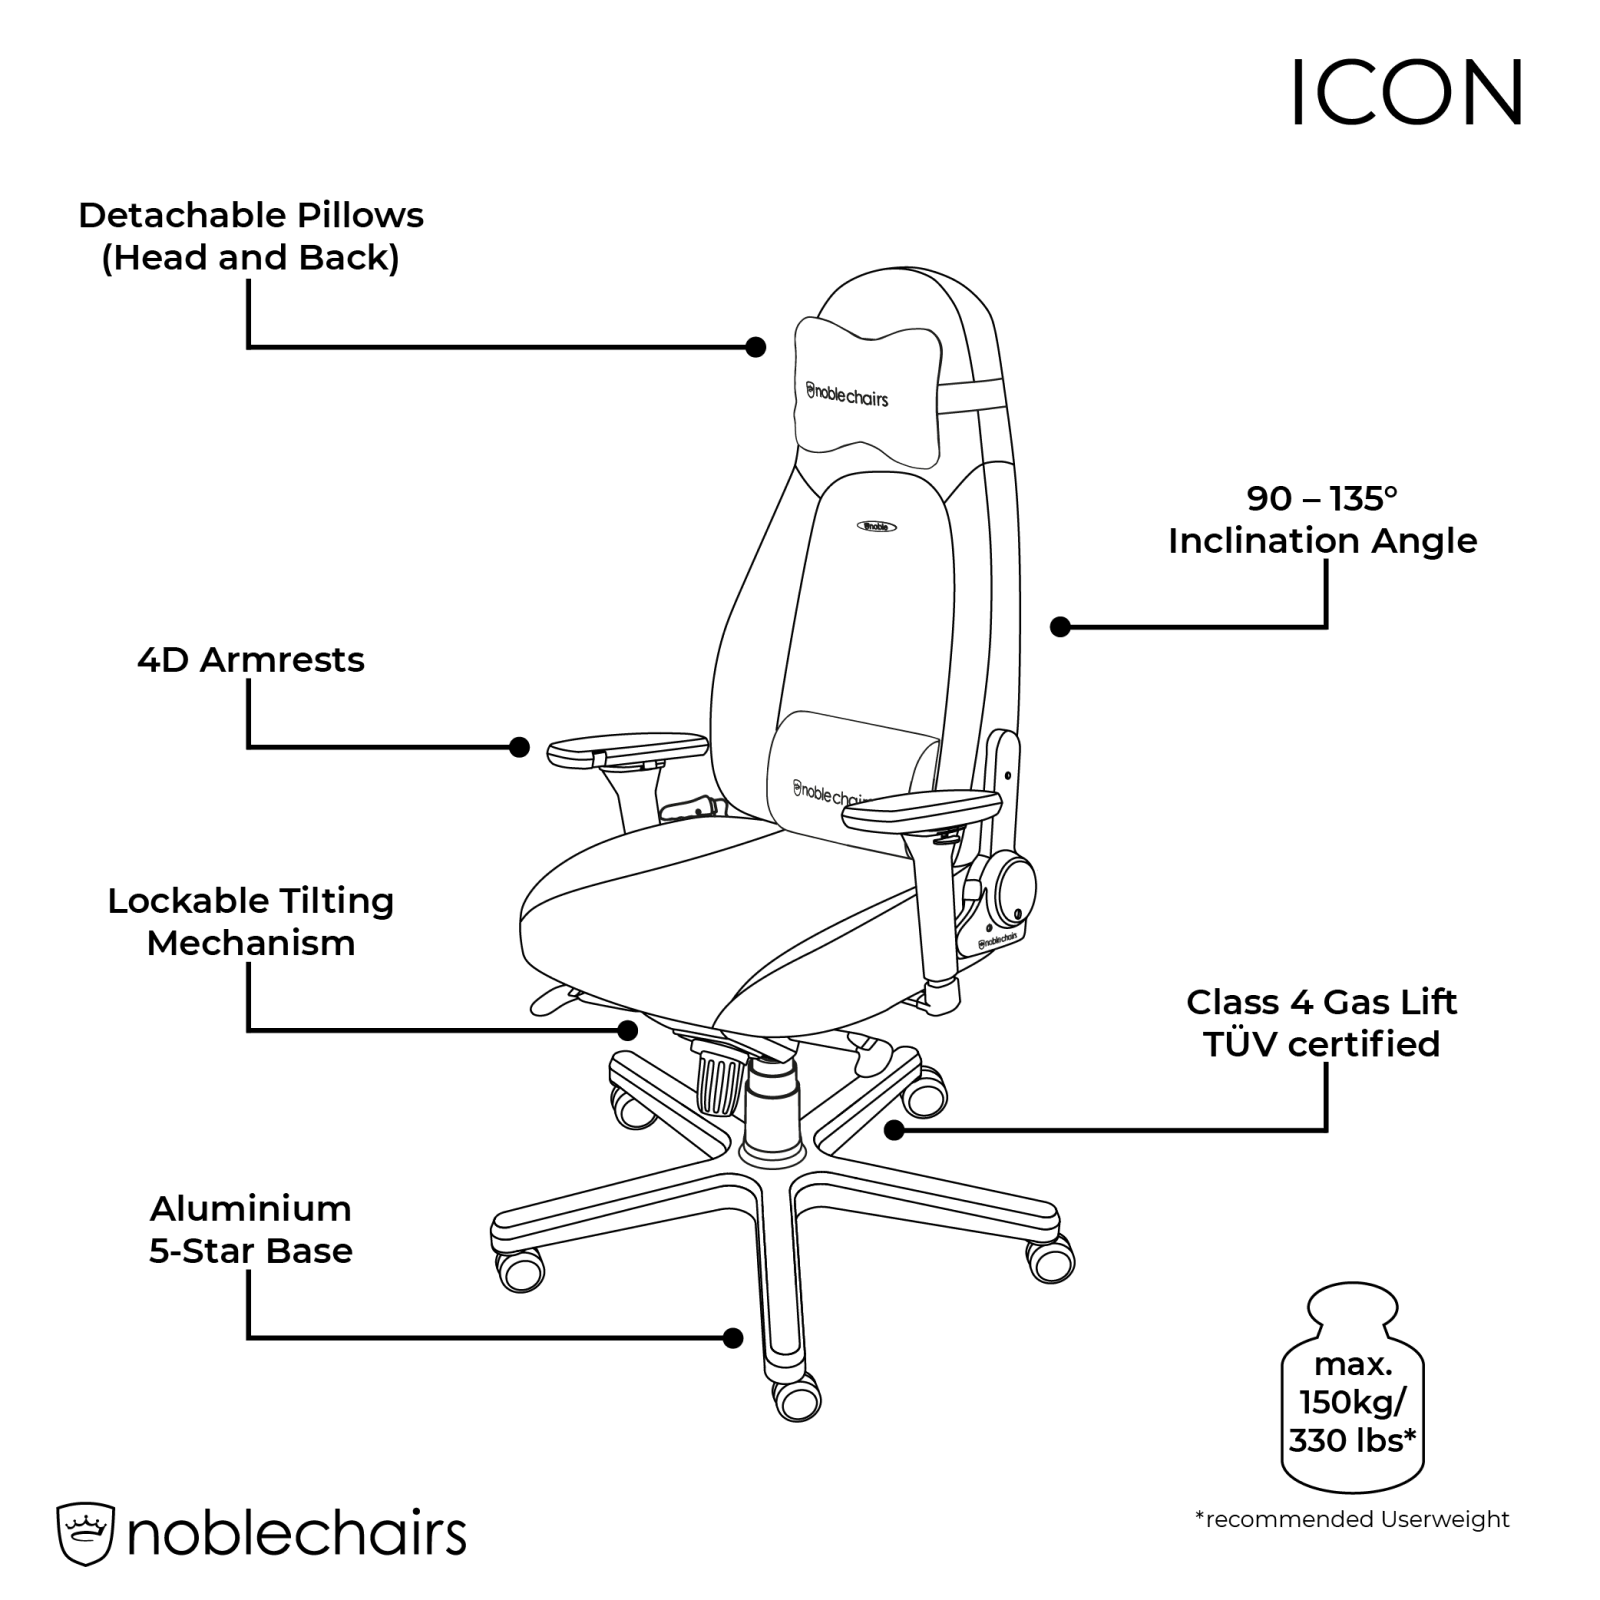 noblechairs ICON Features